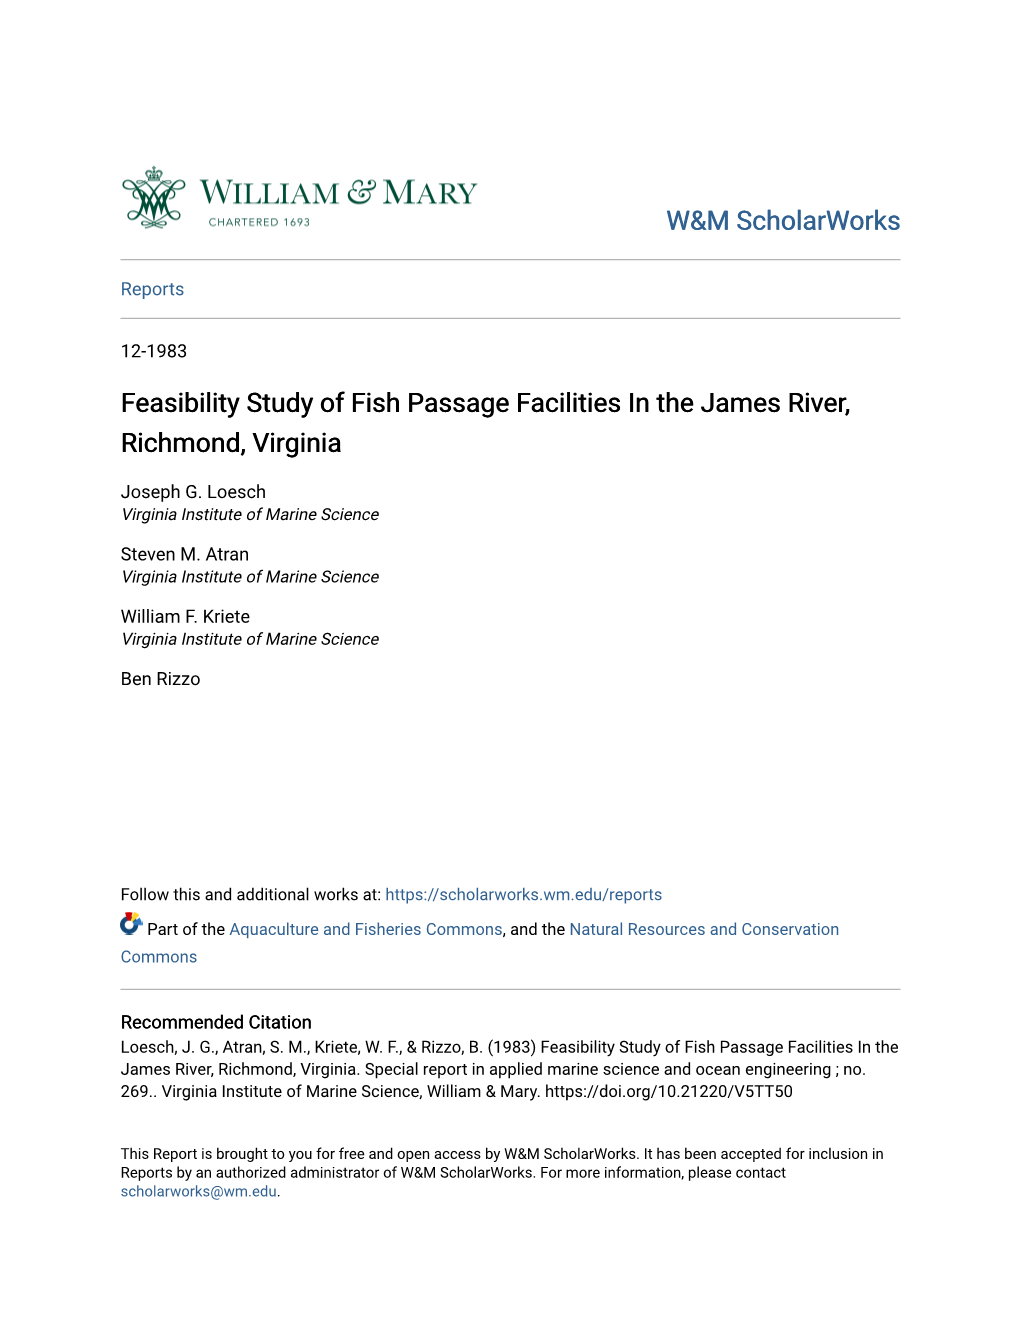 Feasibility Study of Fish Passage Facilities in the James River, Richmond, Virginia